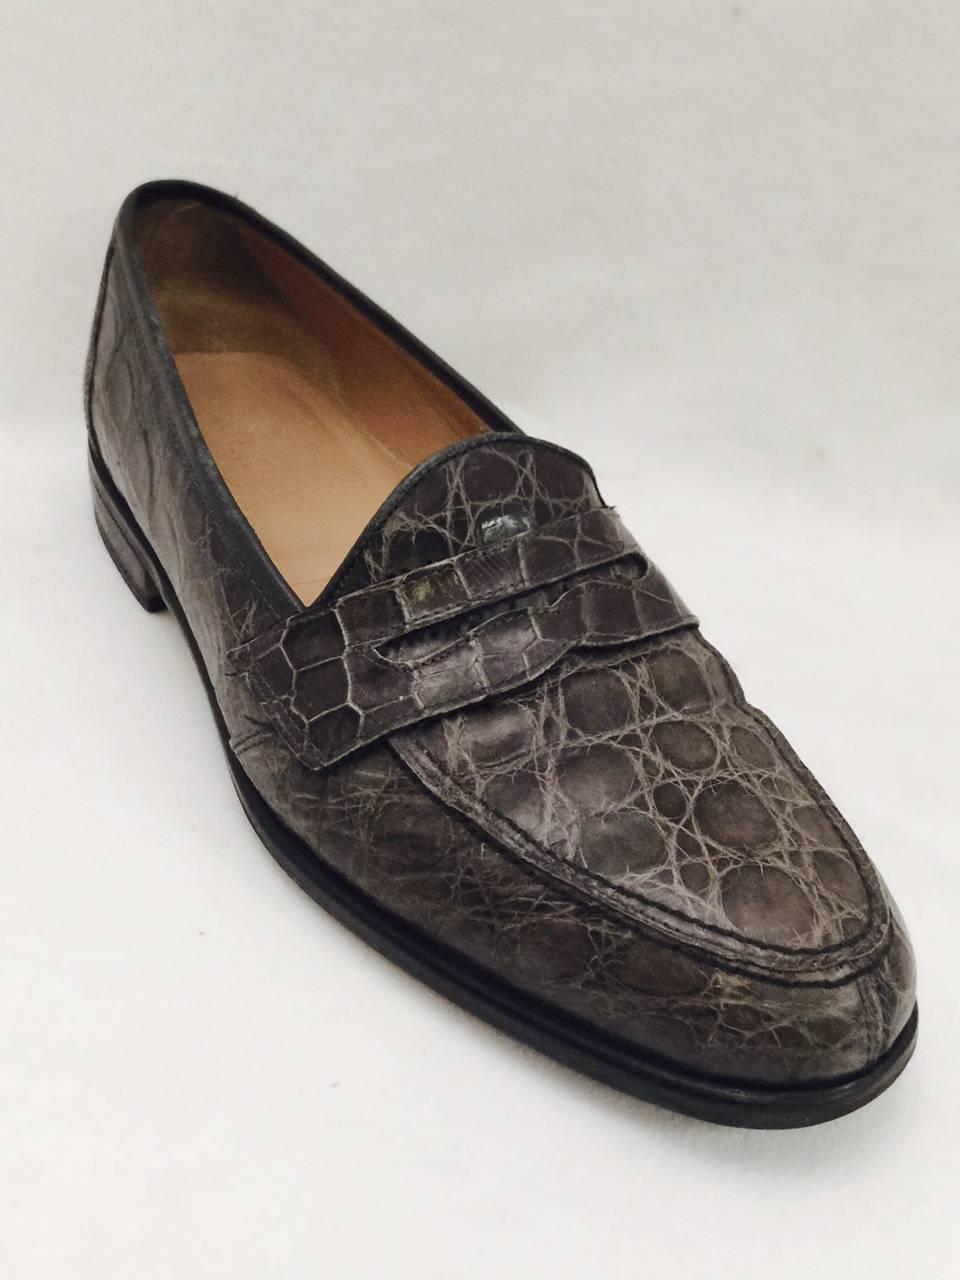 Handmade in Italy, these M.C. Mario Campatelli penny loafers are crafted in genuine neutral light brown crocodile, for an adaptable elegant look that can be either formal dress,  or great with jeans. Fitted with rubber soles for non slip grip.